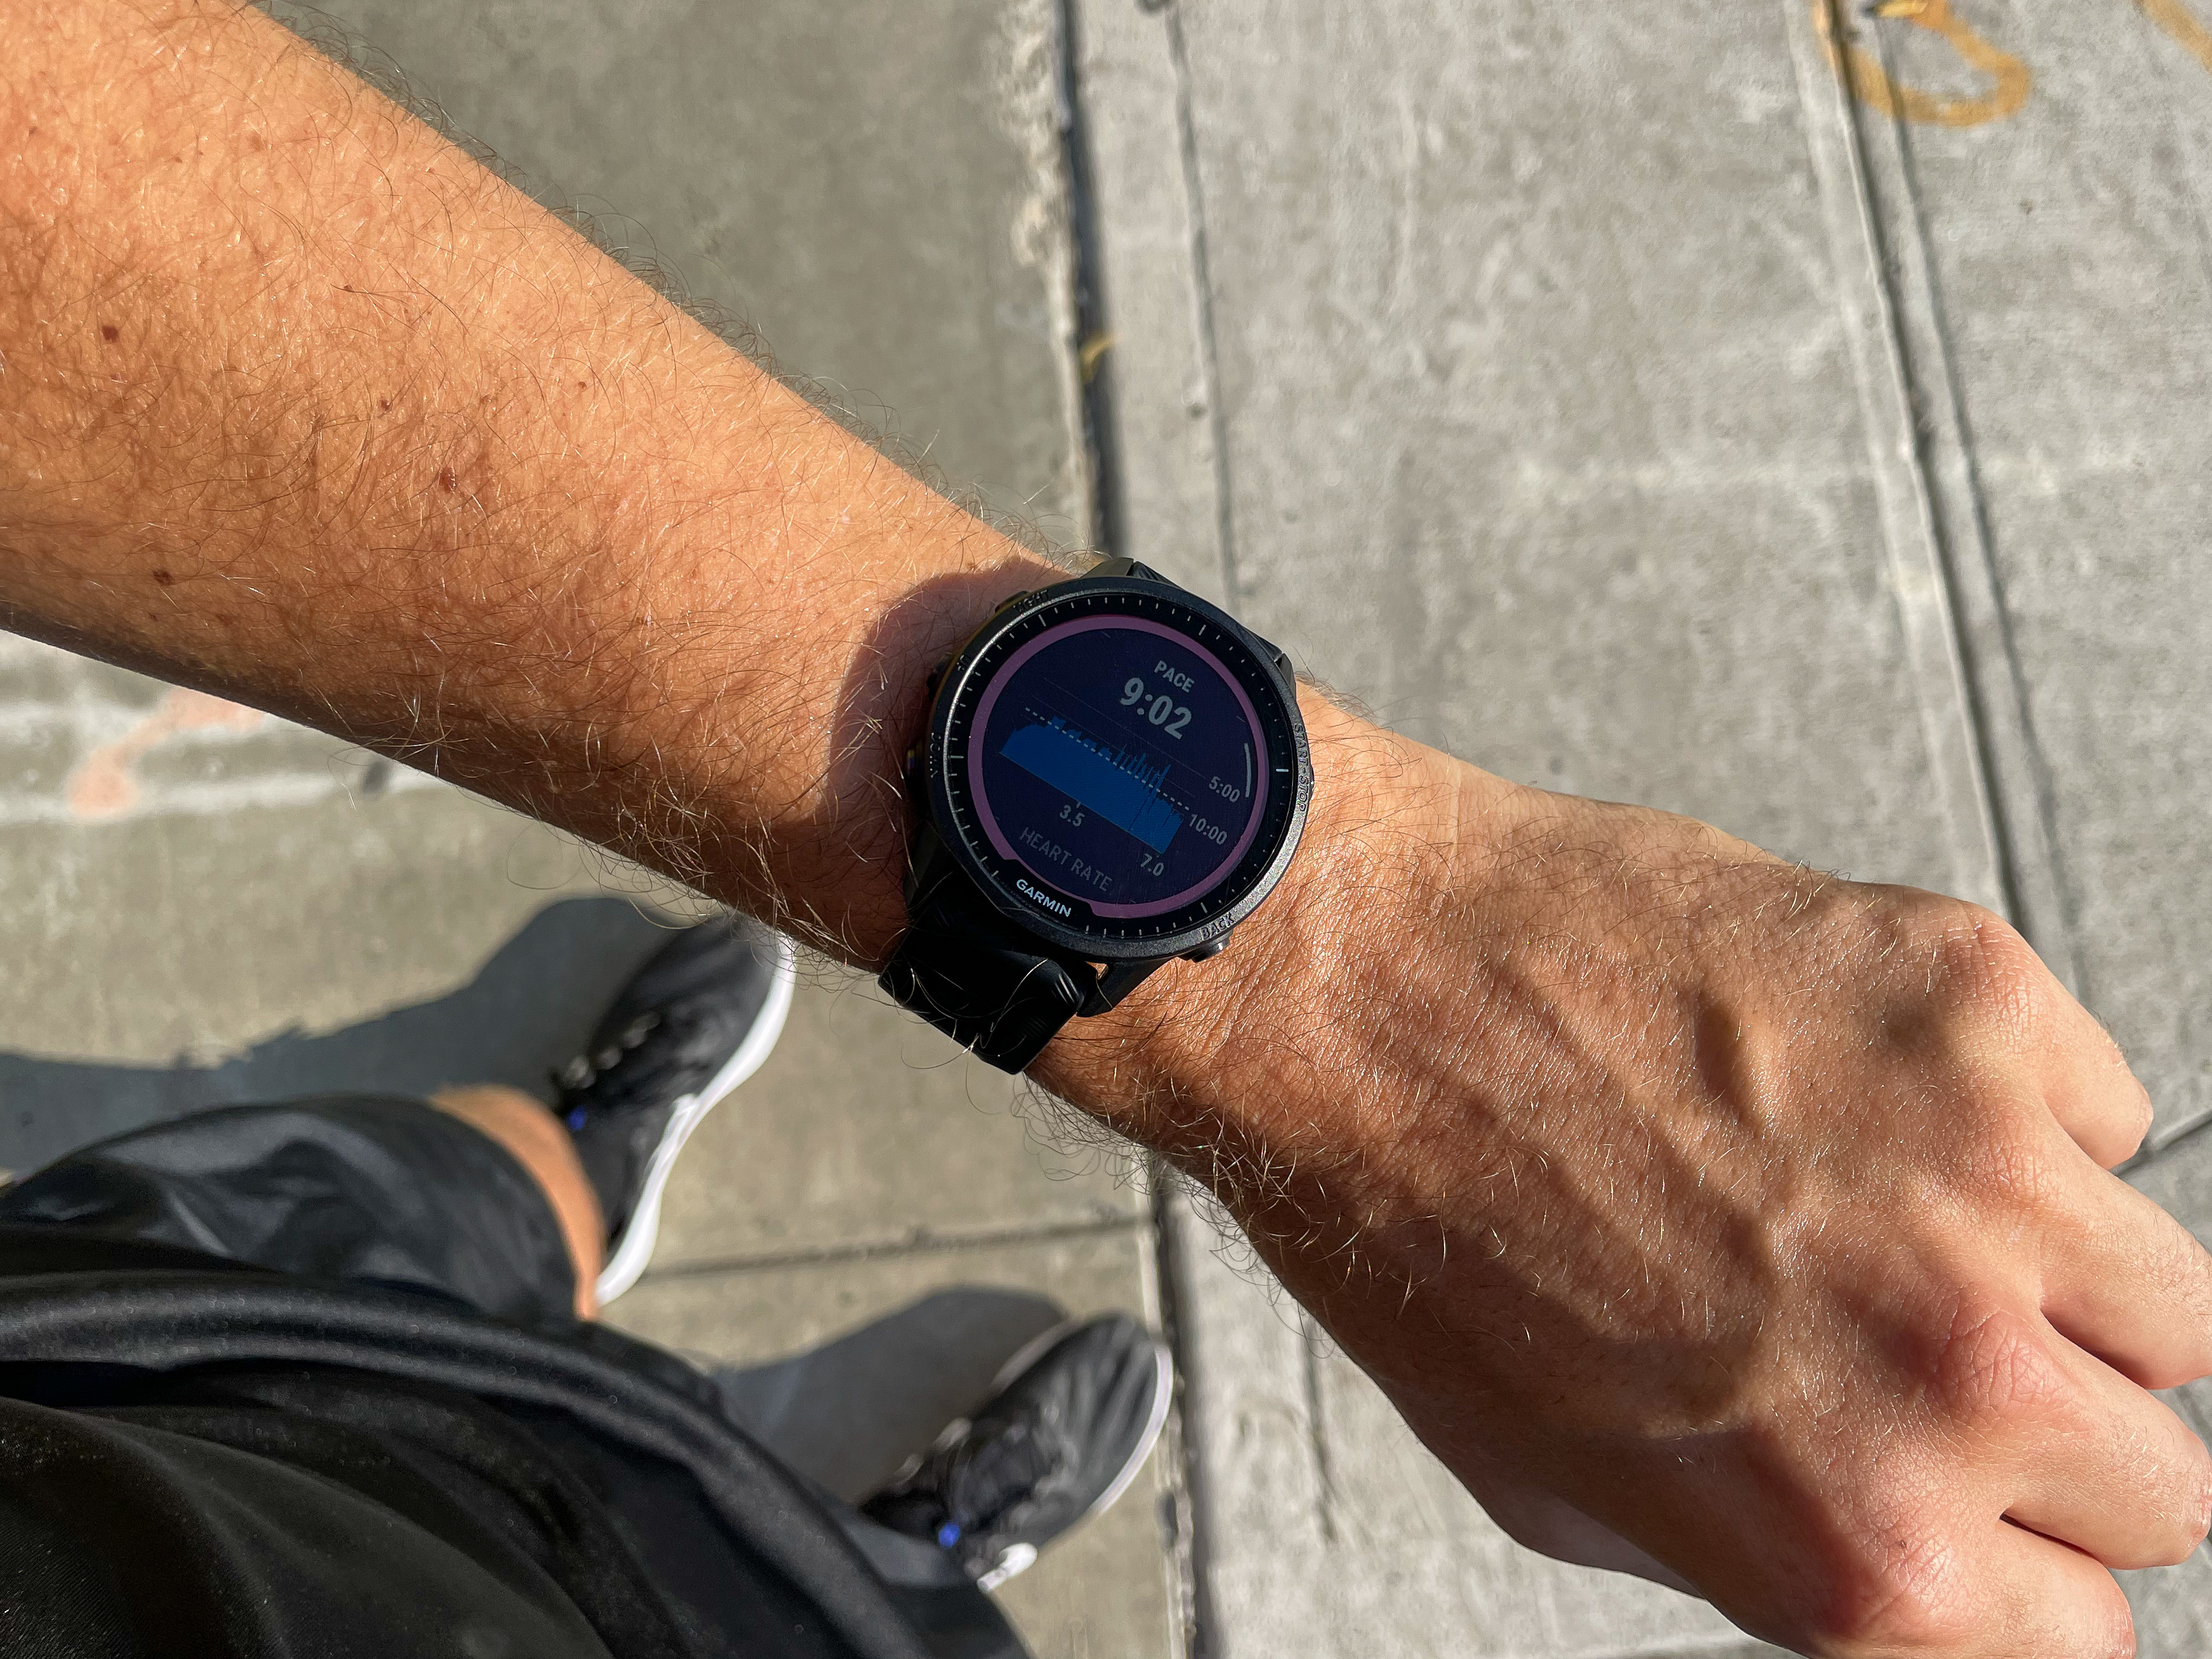 I walked 5000 steps with the Apple Watch 8 and Garmin Forerunner 265 — and  one was way more accurate